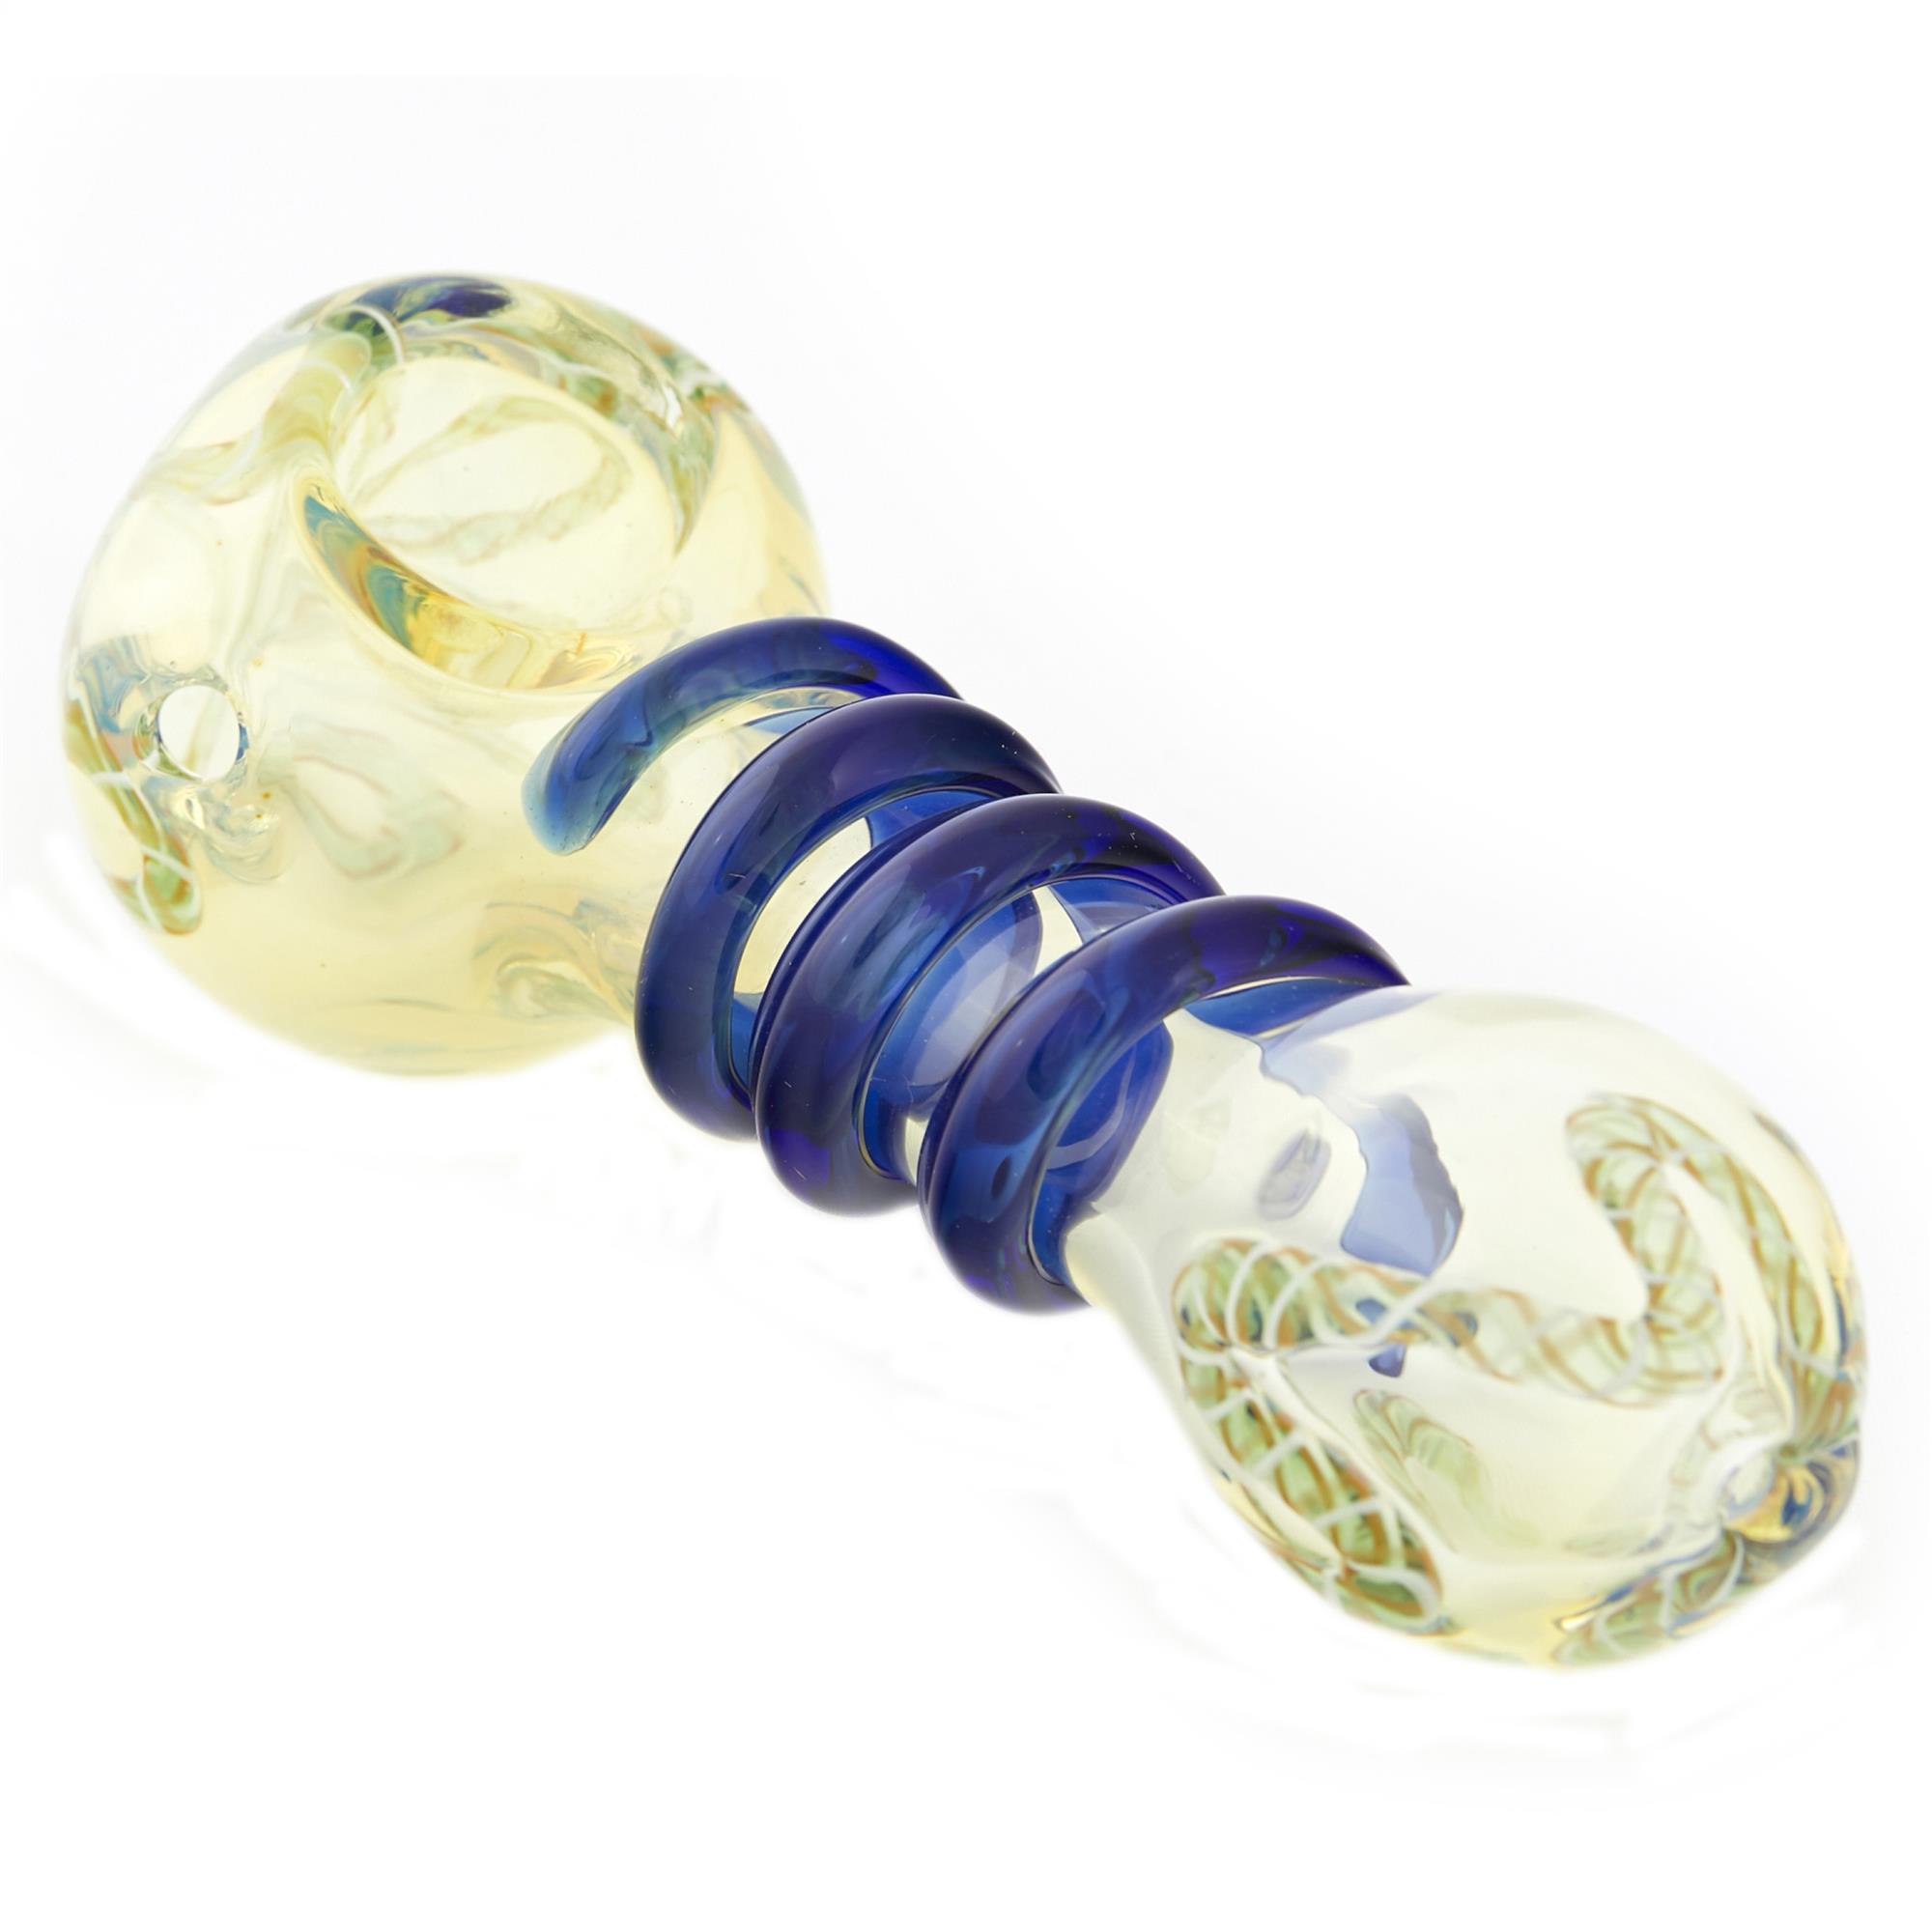 HIGH STATE OF MIND SPOON PIPE